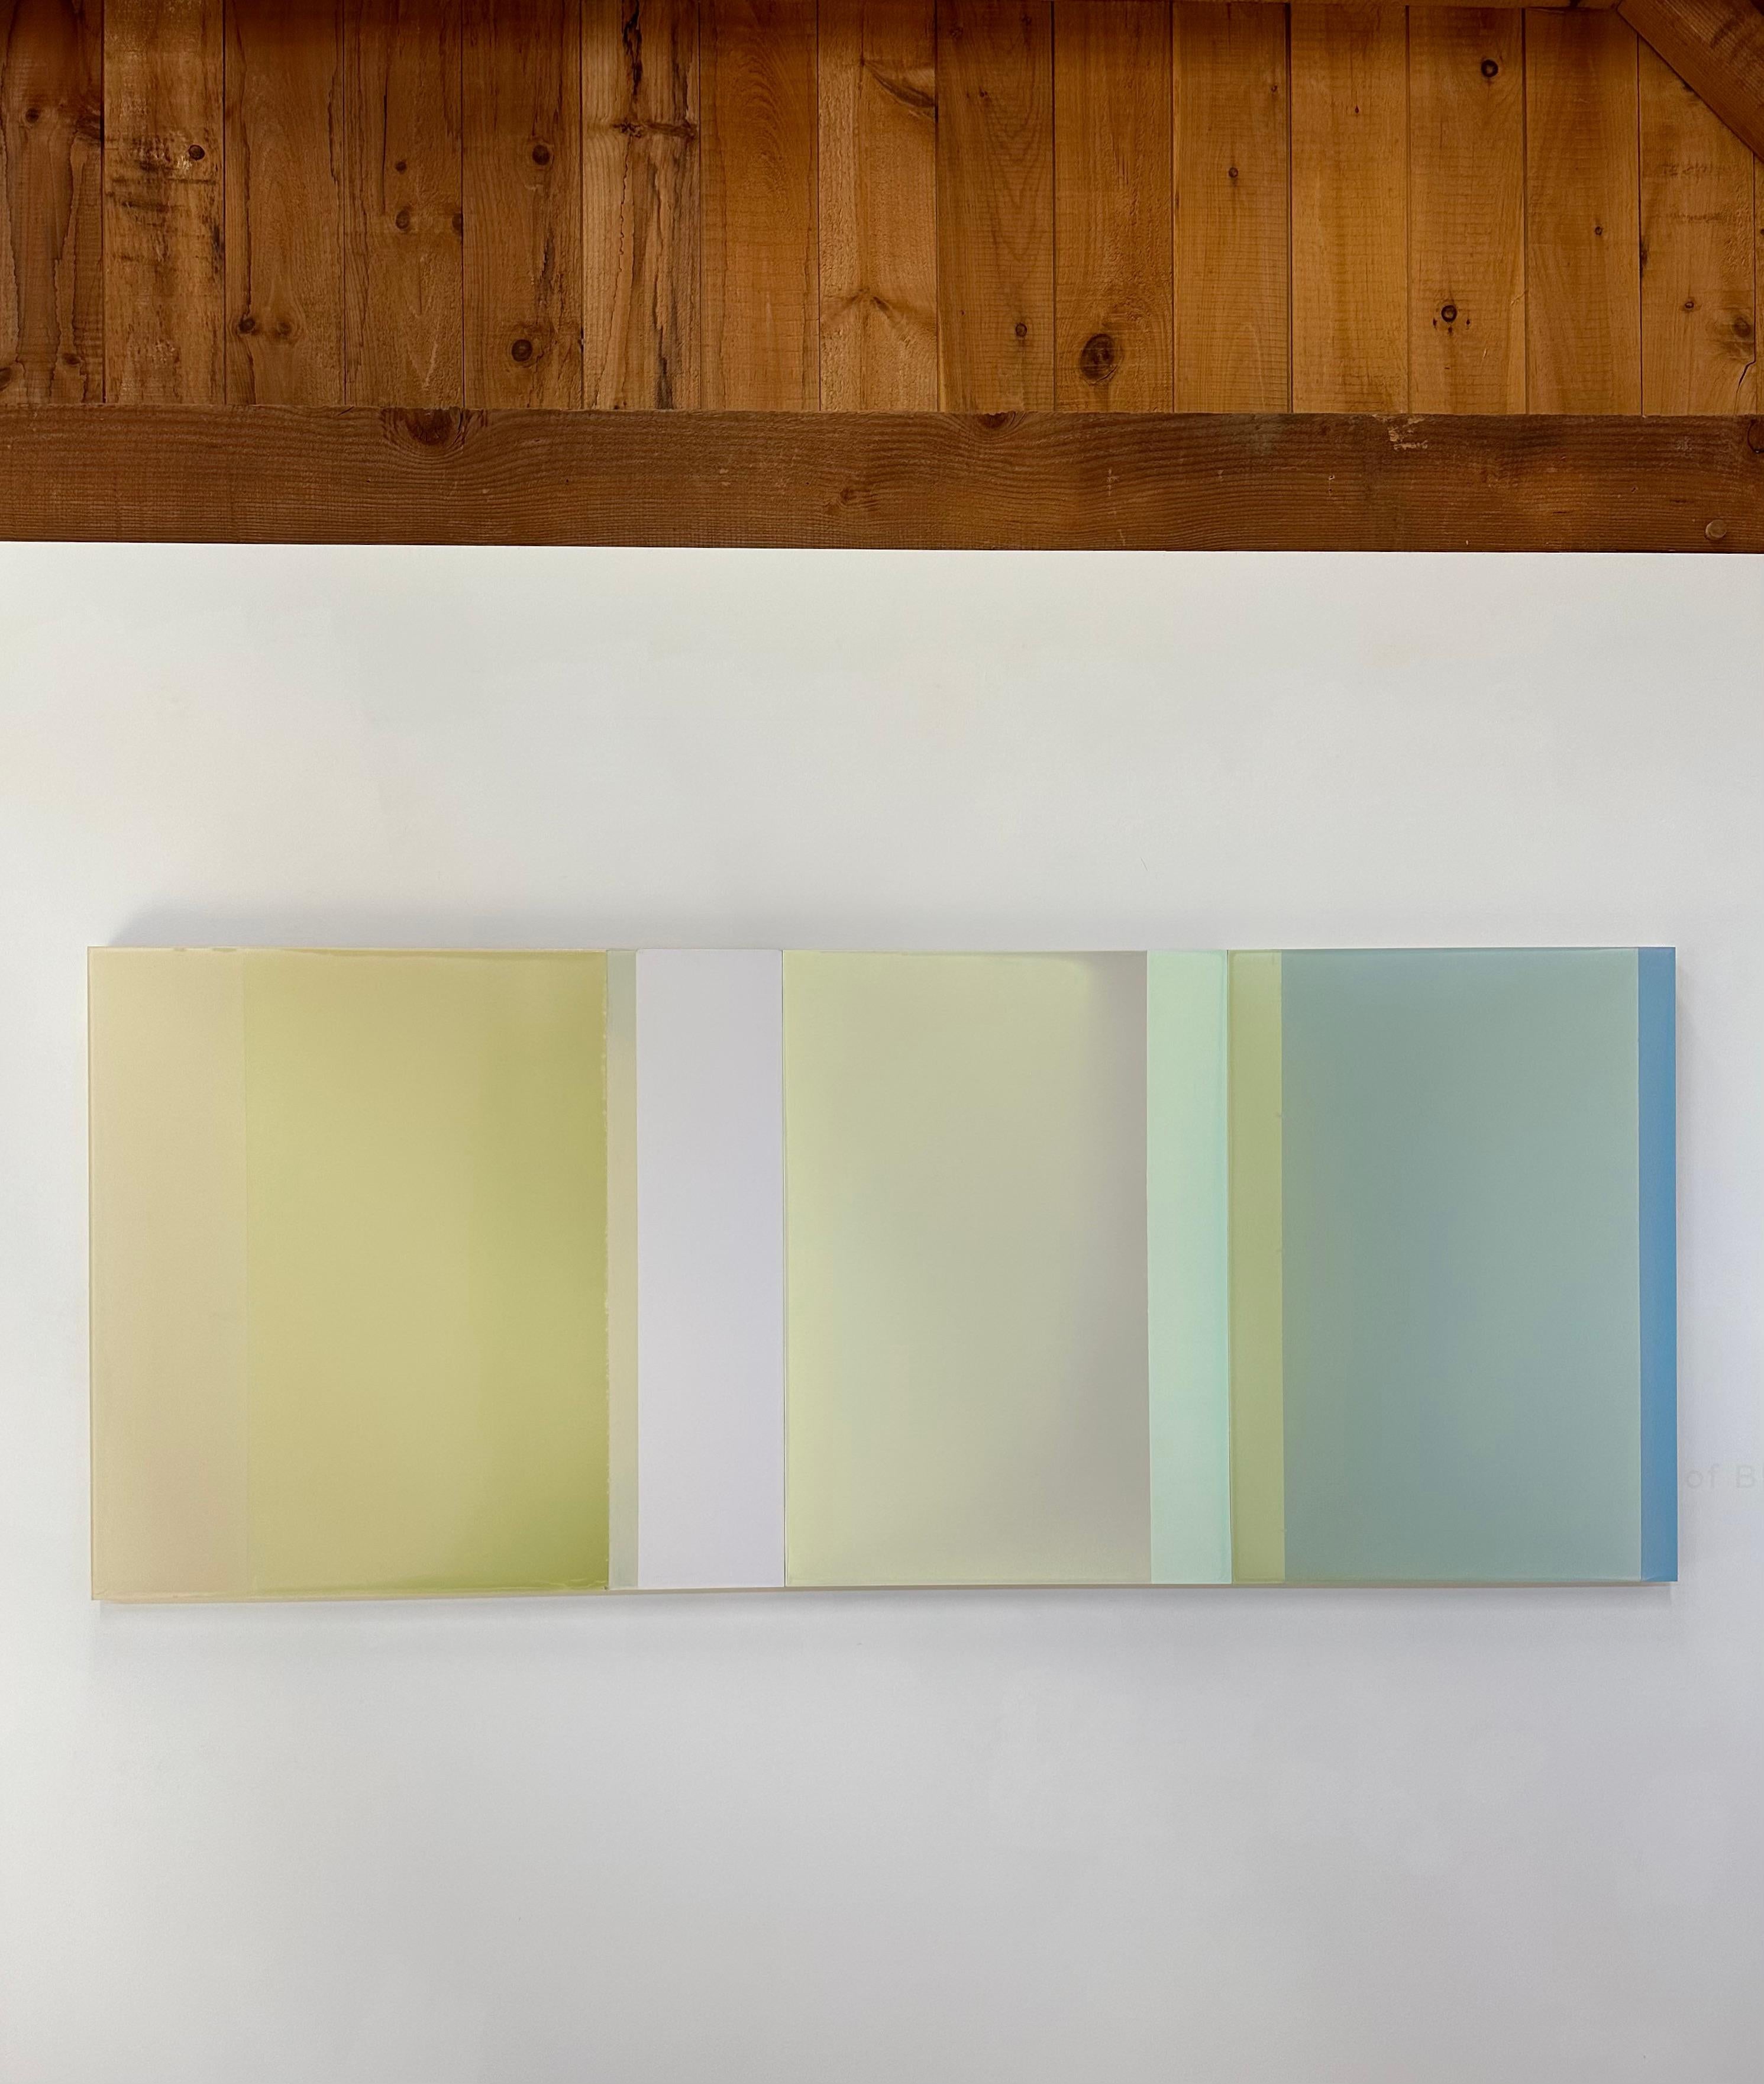 The surface of Leave the Path by Susan English is a wonderful play of color, light, and composition. Hues of olive, soft jade, pale sage green, light mint green, and pale bluish green meet and merge in softly transitioning planes. The poured layers